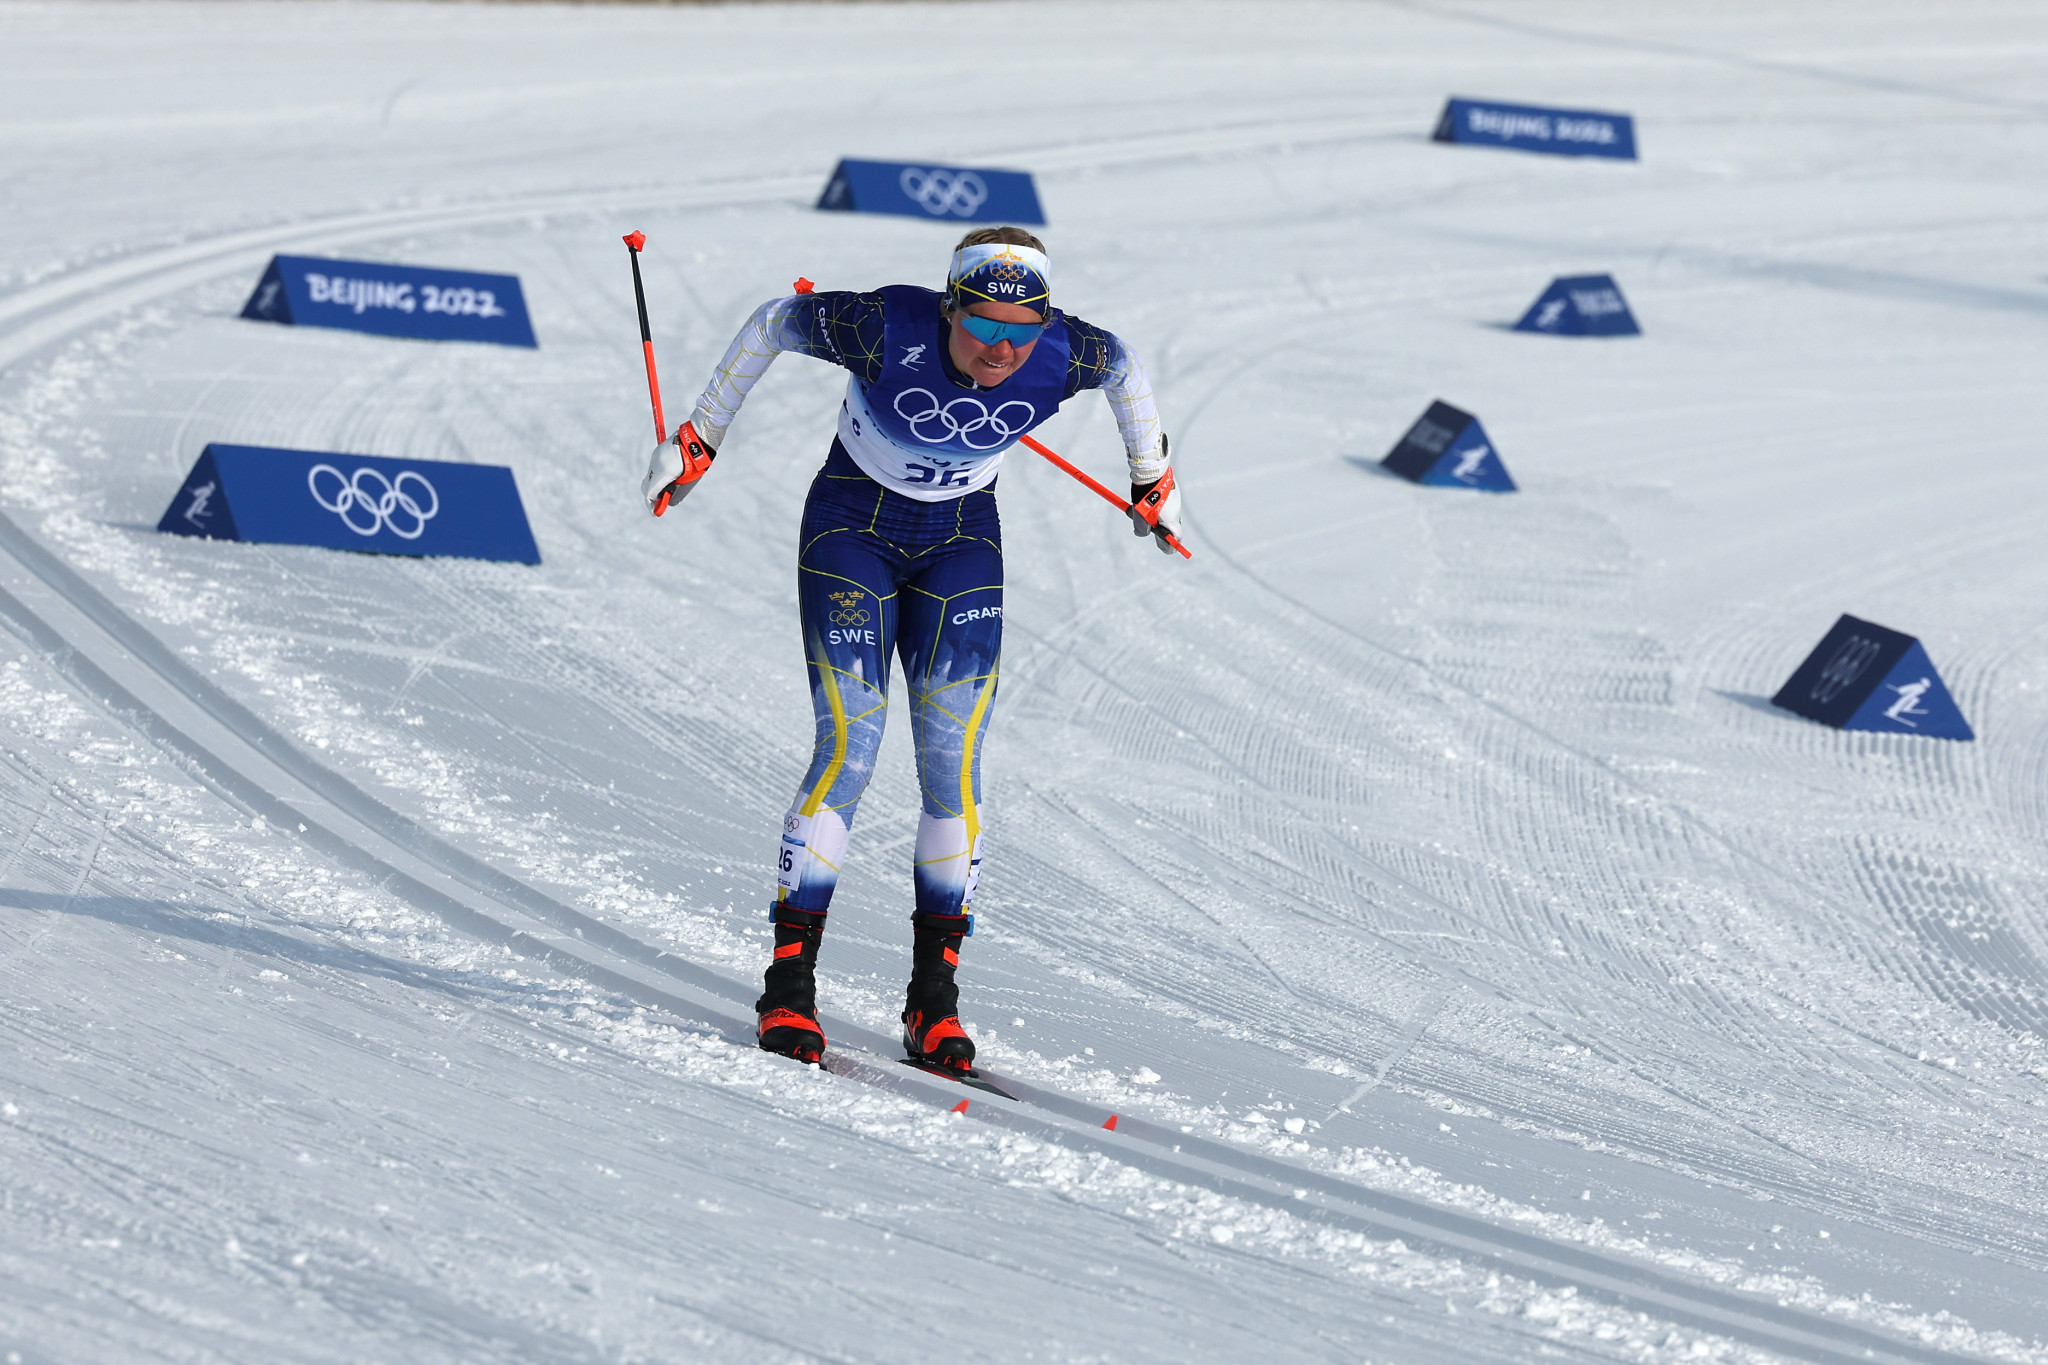 Emma Ribom earned a first World Cup victory today  ©Getty Images